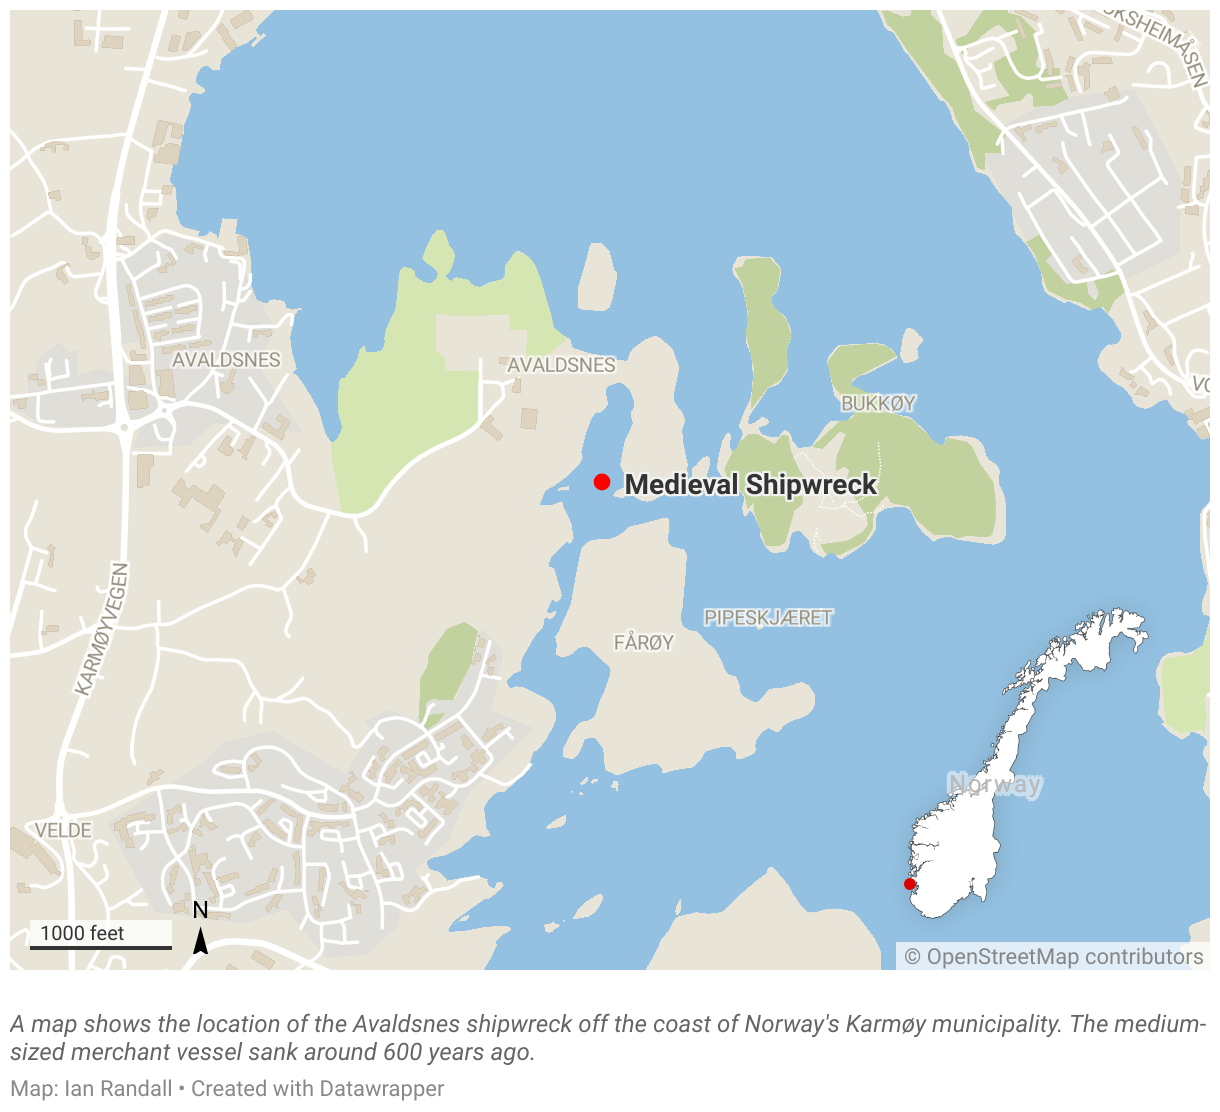 A map shows the location of the Avaldsnes shipwreck in Norway's Karmøy municipality.